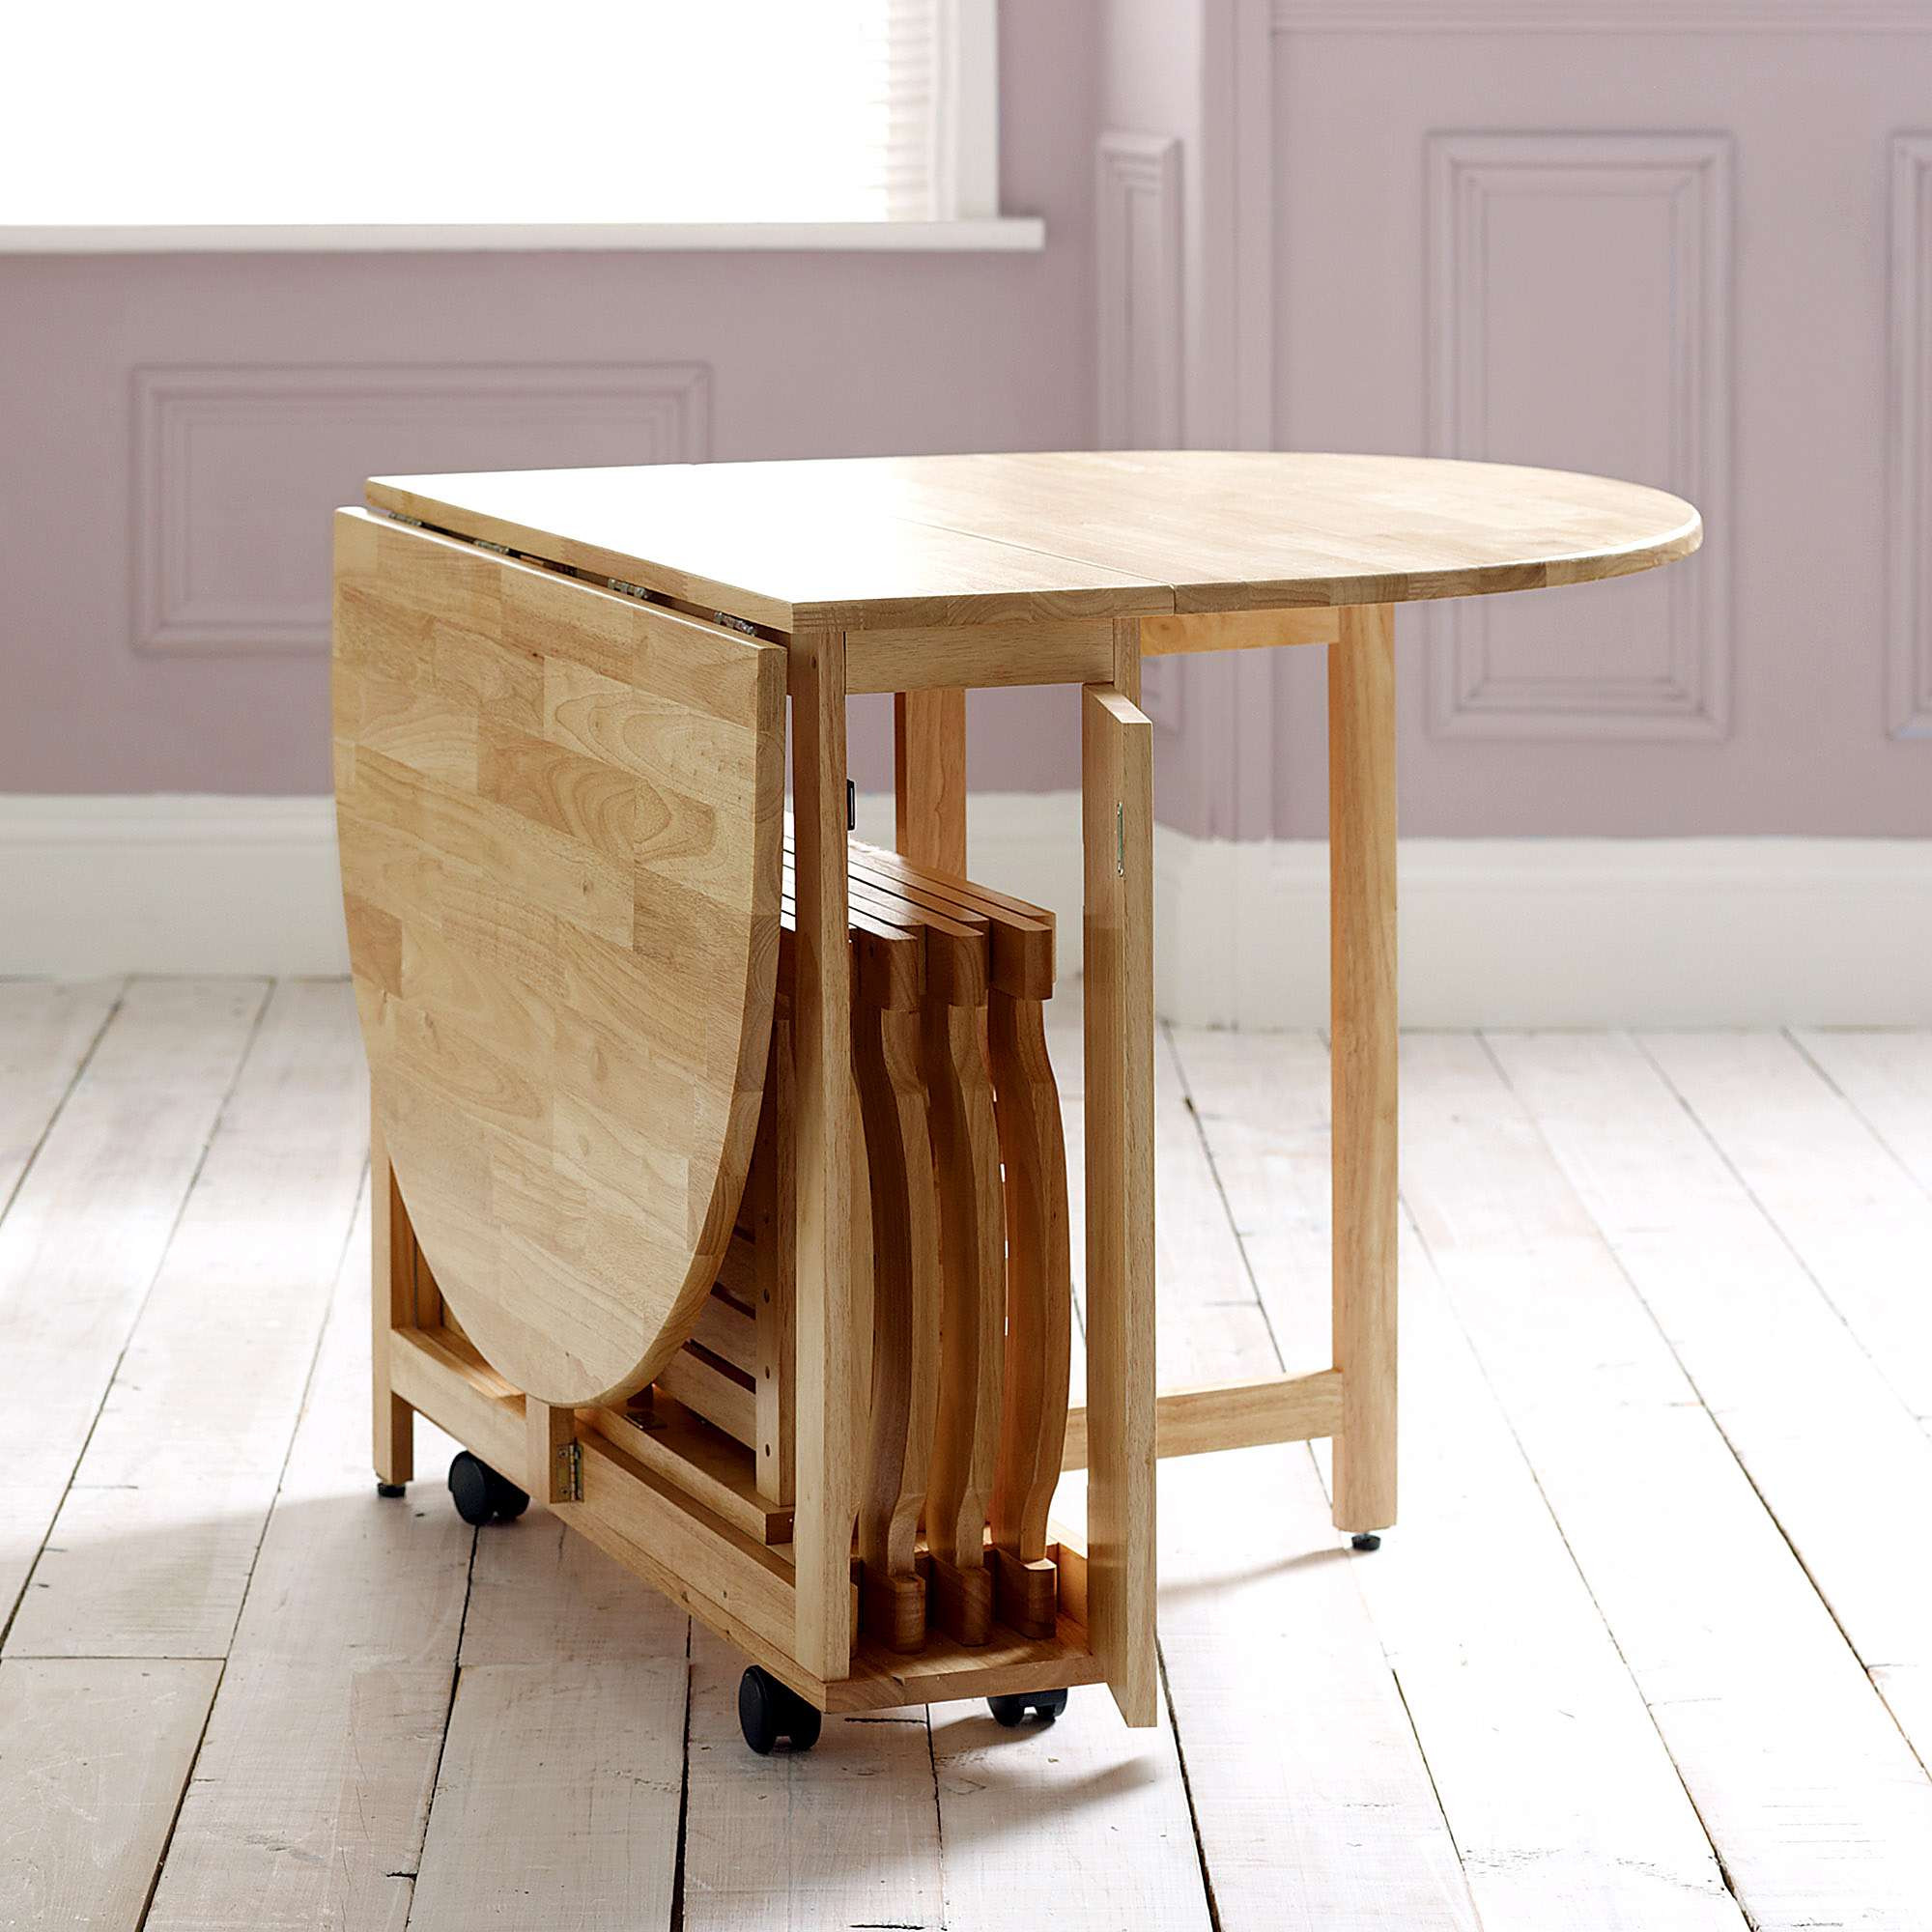 Small Folding Kitchen Table
 Choose a Folding Dining Table for a Small Space – Adorable